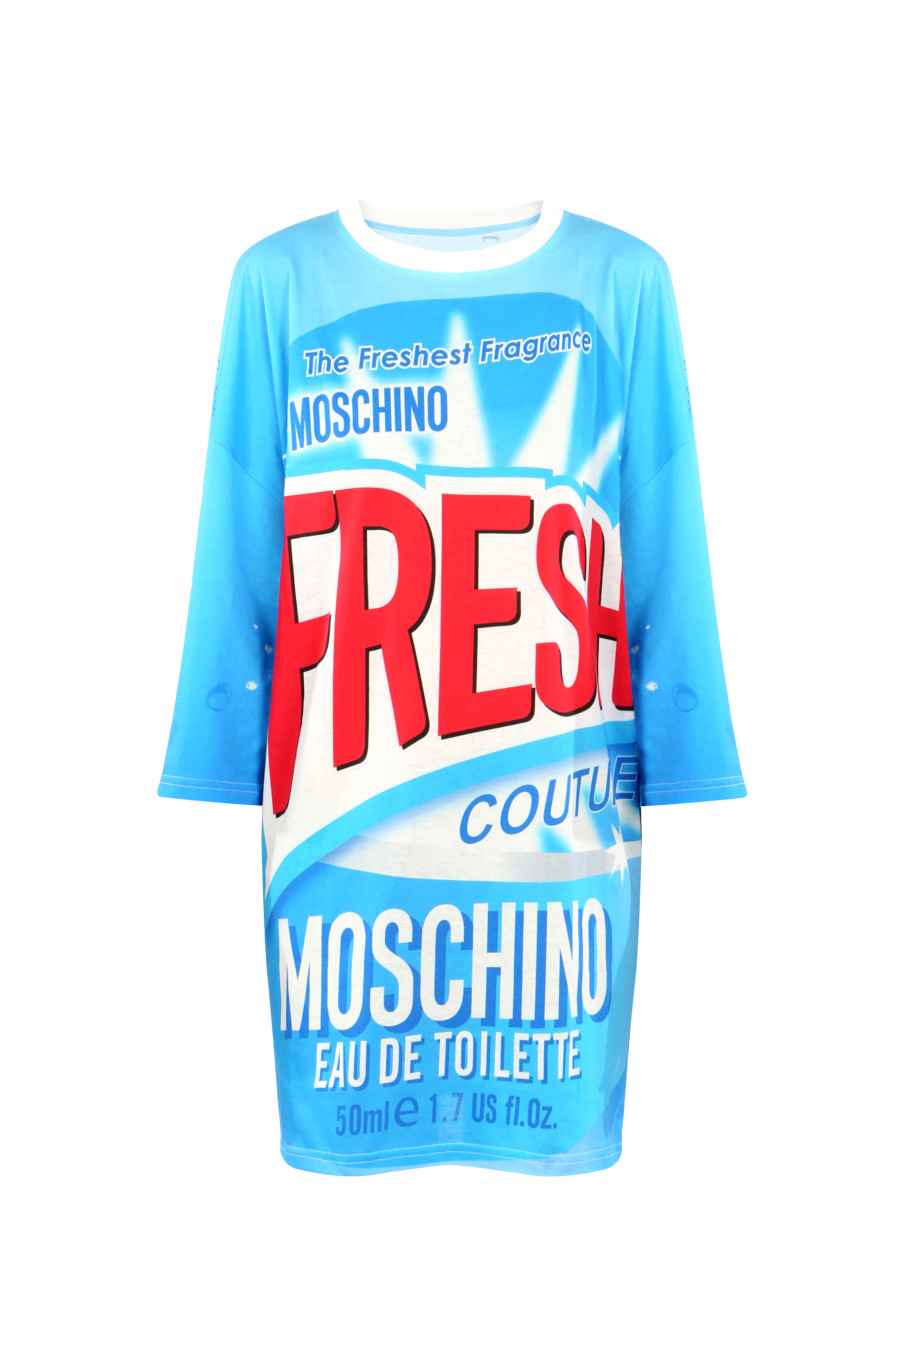 04 - MOSCHINO CAPSULE COLLECTION SS16